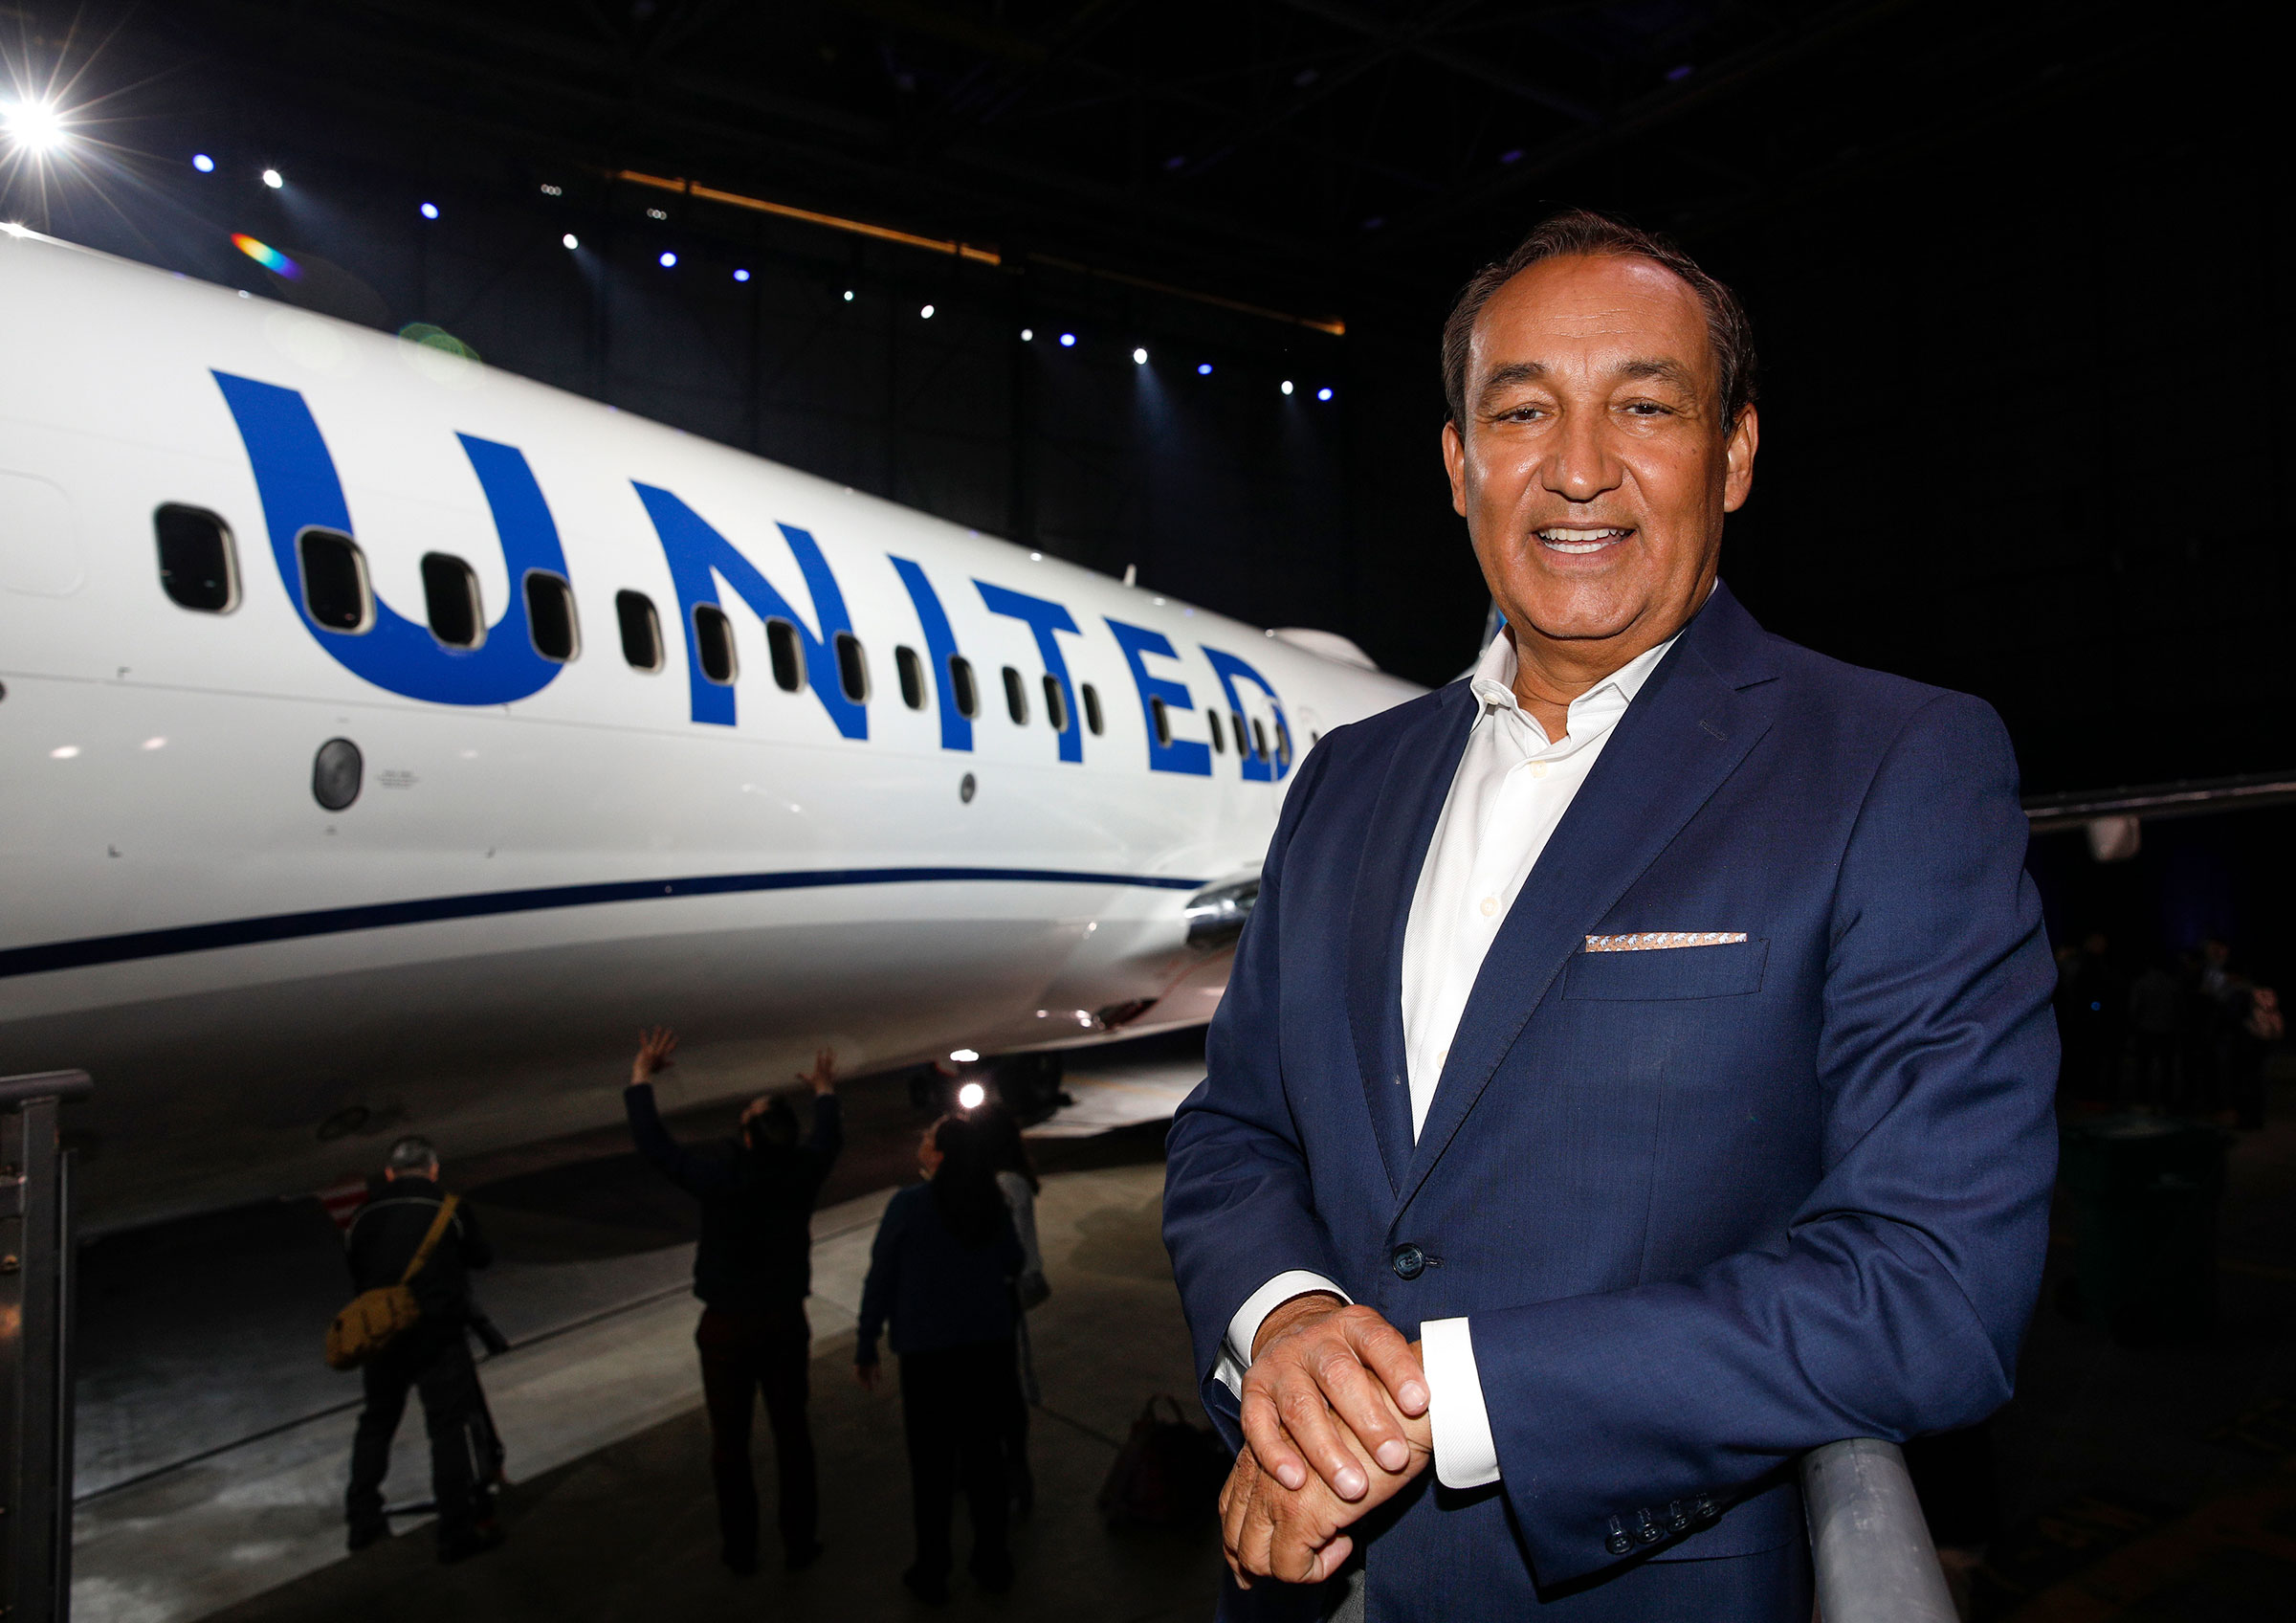 Oscar Munoz, chief executive officer of United Continental Holdings Inc. during an event in Chicago on Wednesday, April 24, 2019. (Jim Young—Bloomberg/Getty Images)